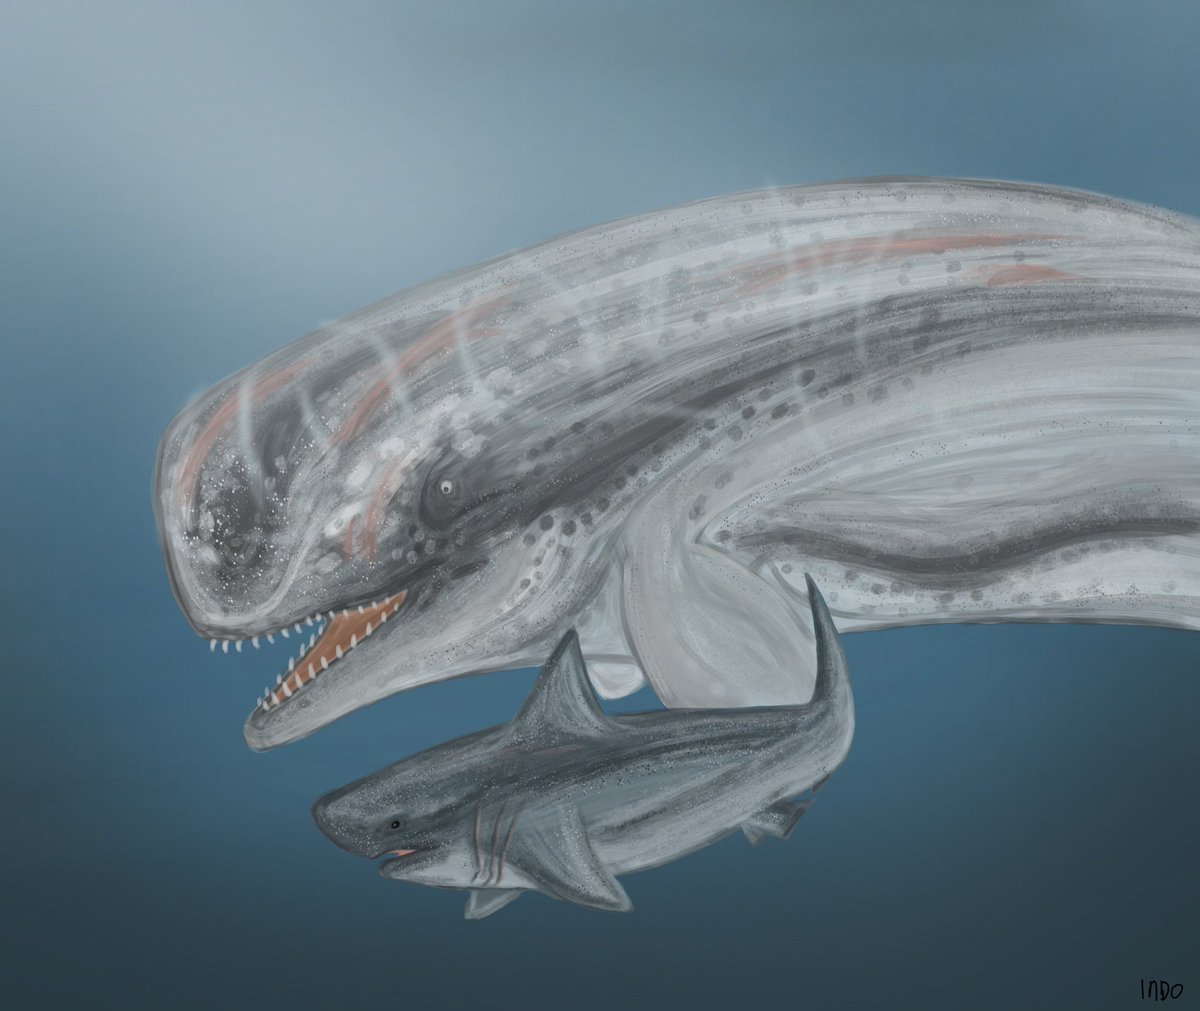 A grieving livyatan mother “adopts” a young megalodon, after the recent loss of her calf in a battle. 

#paleoart